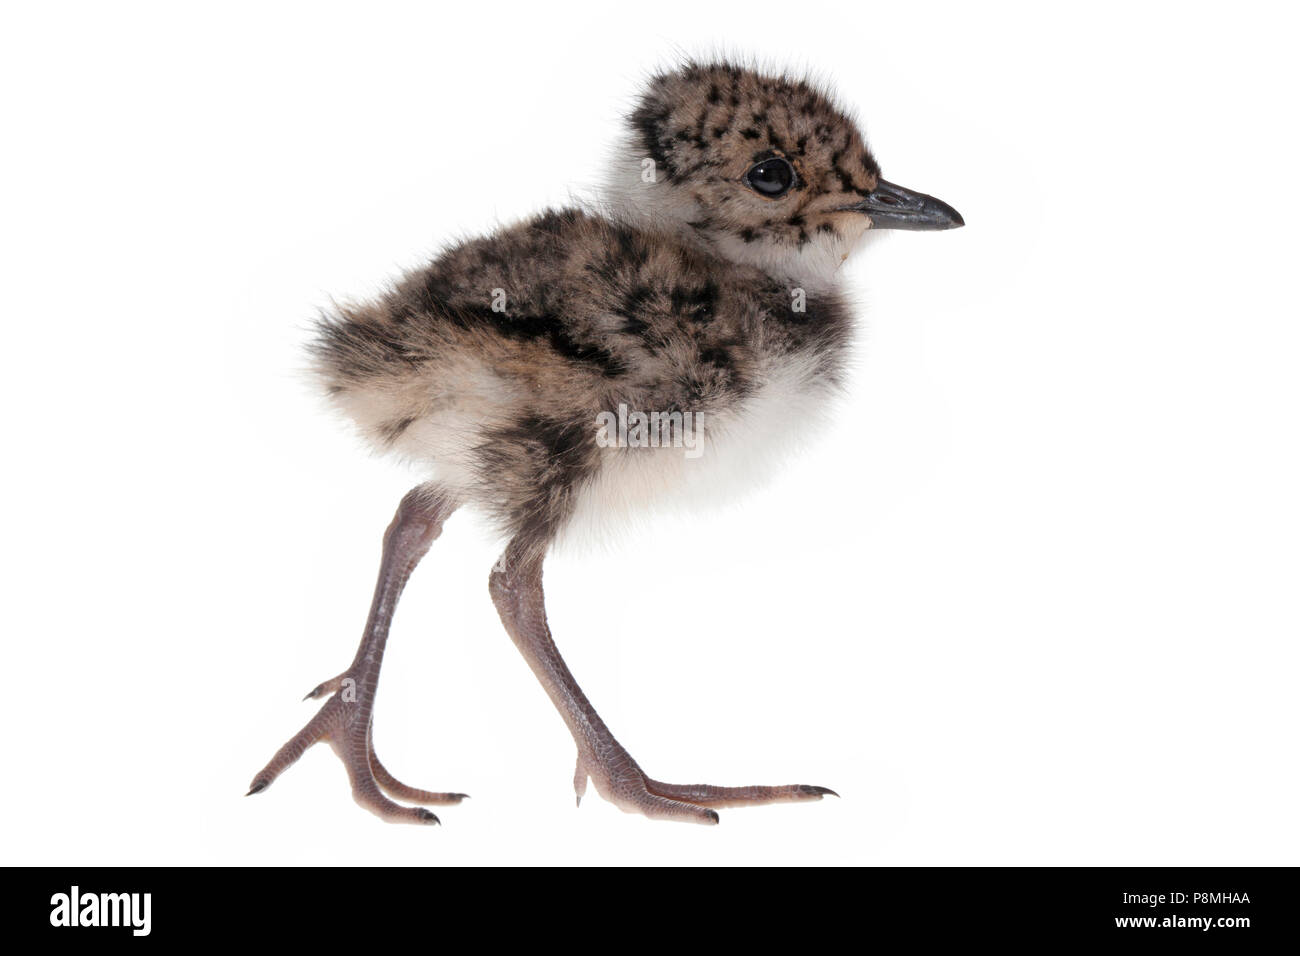 Northern lapwing chick isolated against a white background Stock Photo